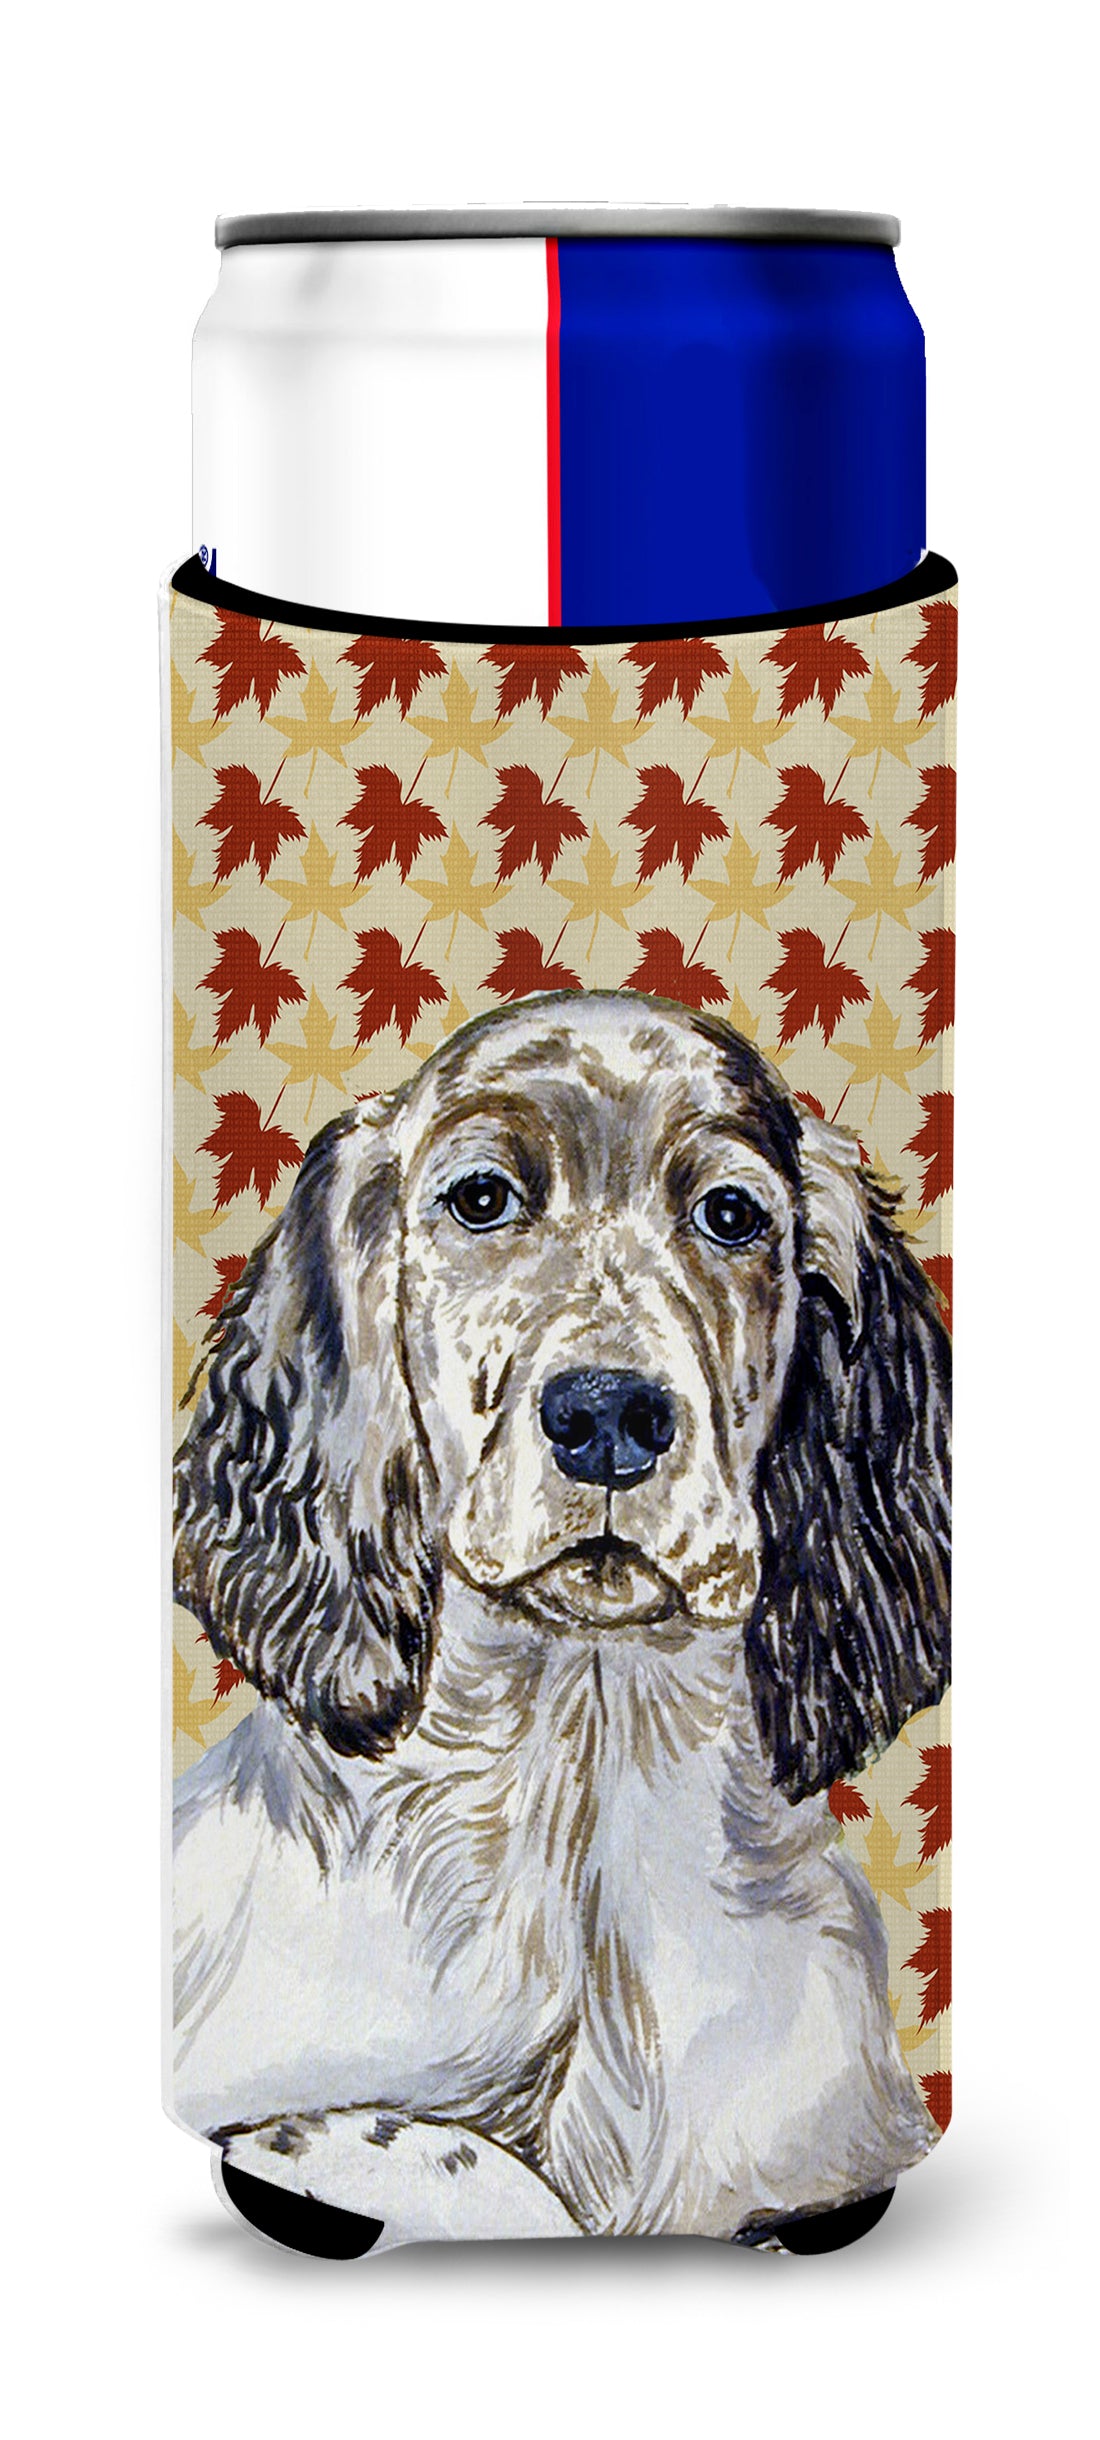 English Setter Fall Leaves Portrait Ultra Beverage Insulators for slim cans LH9097MUK.